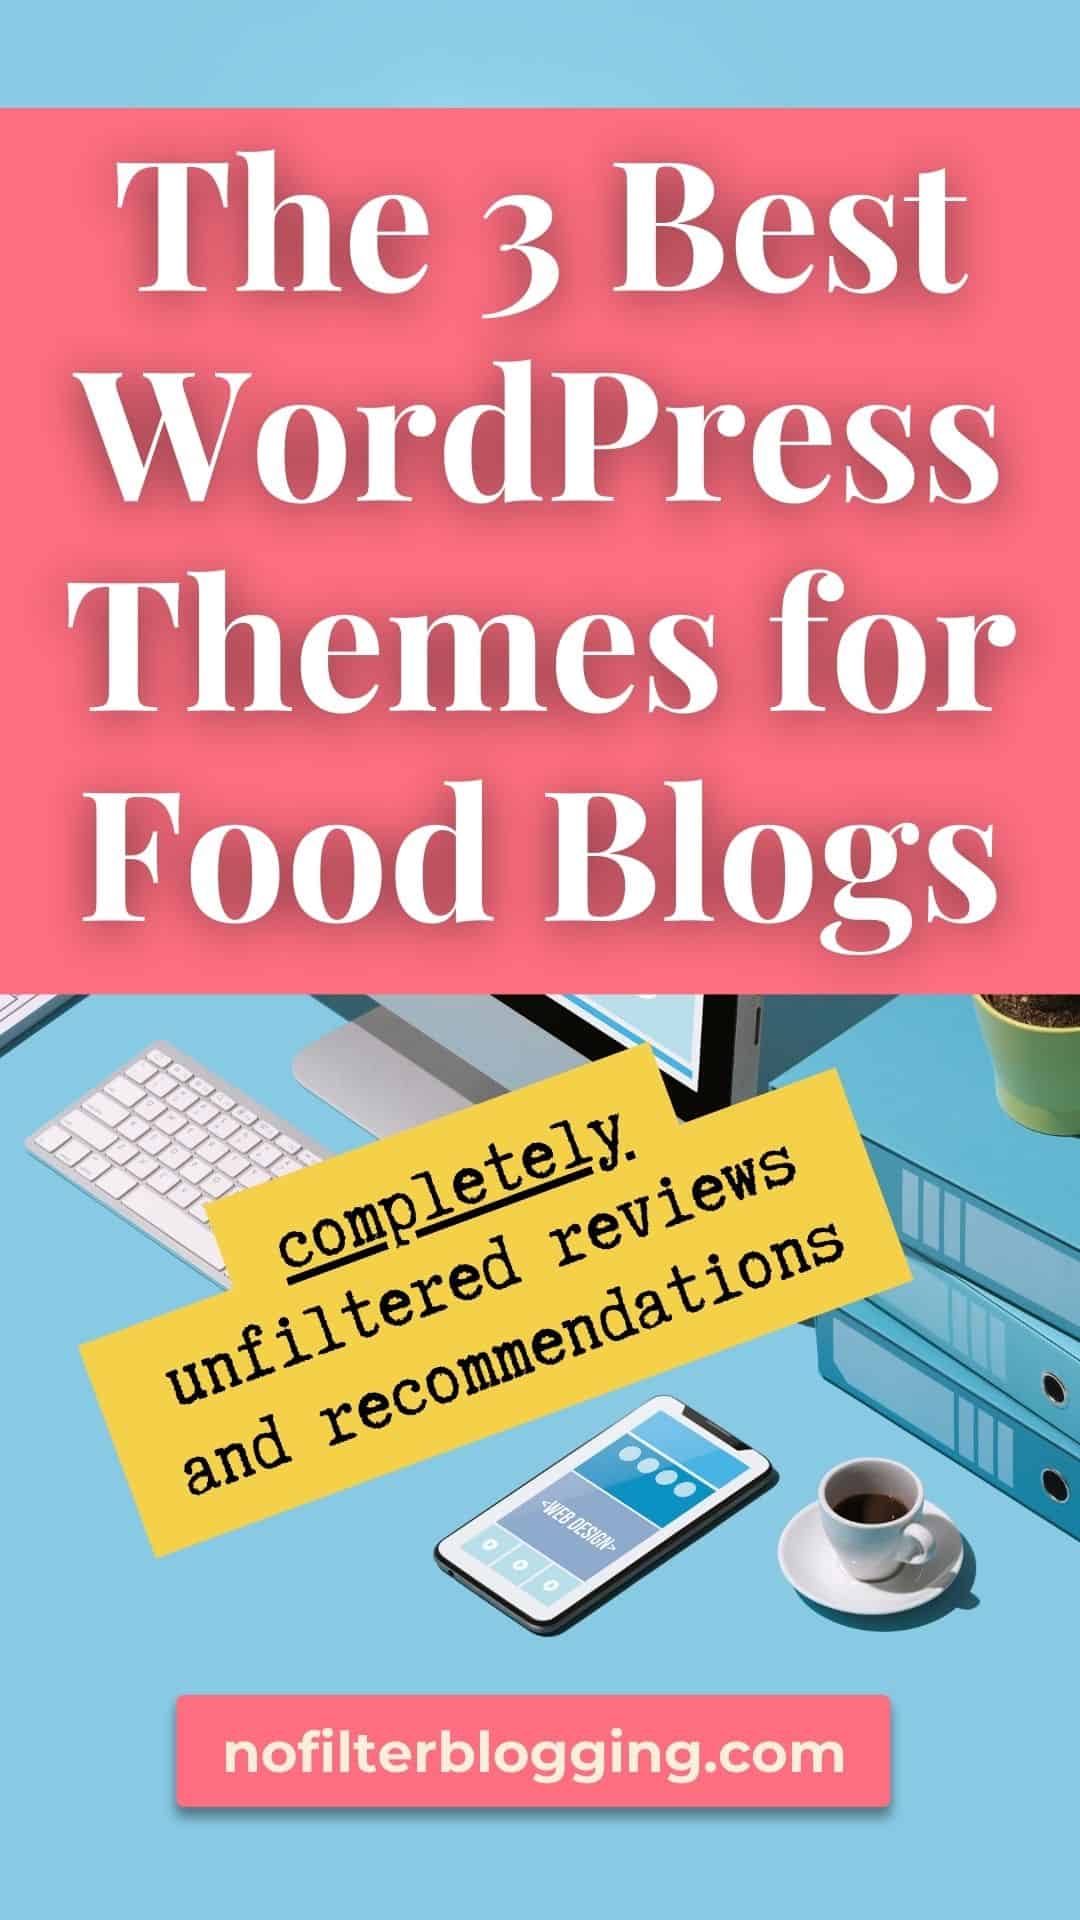 The 3 Best WordPress Themes for Food Blogs